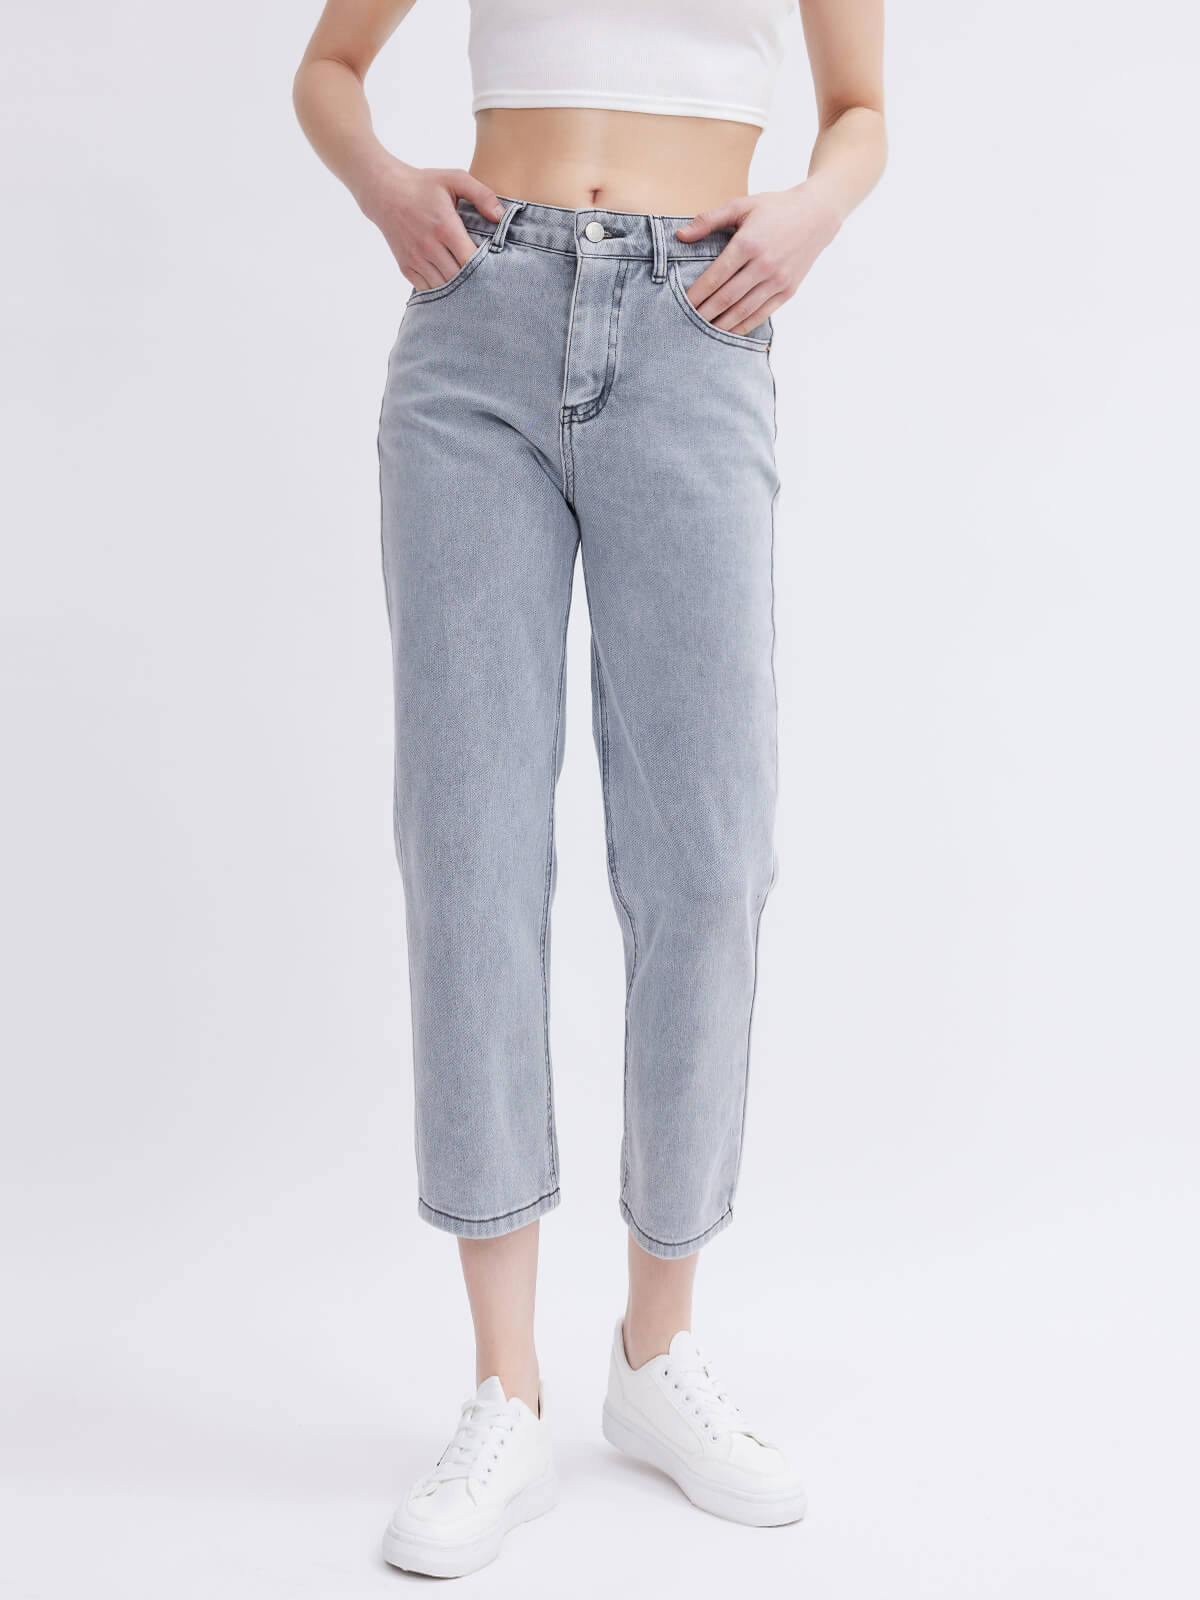 ASOBIO Cropped Jeans For Women